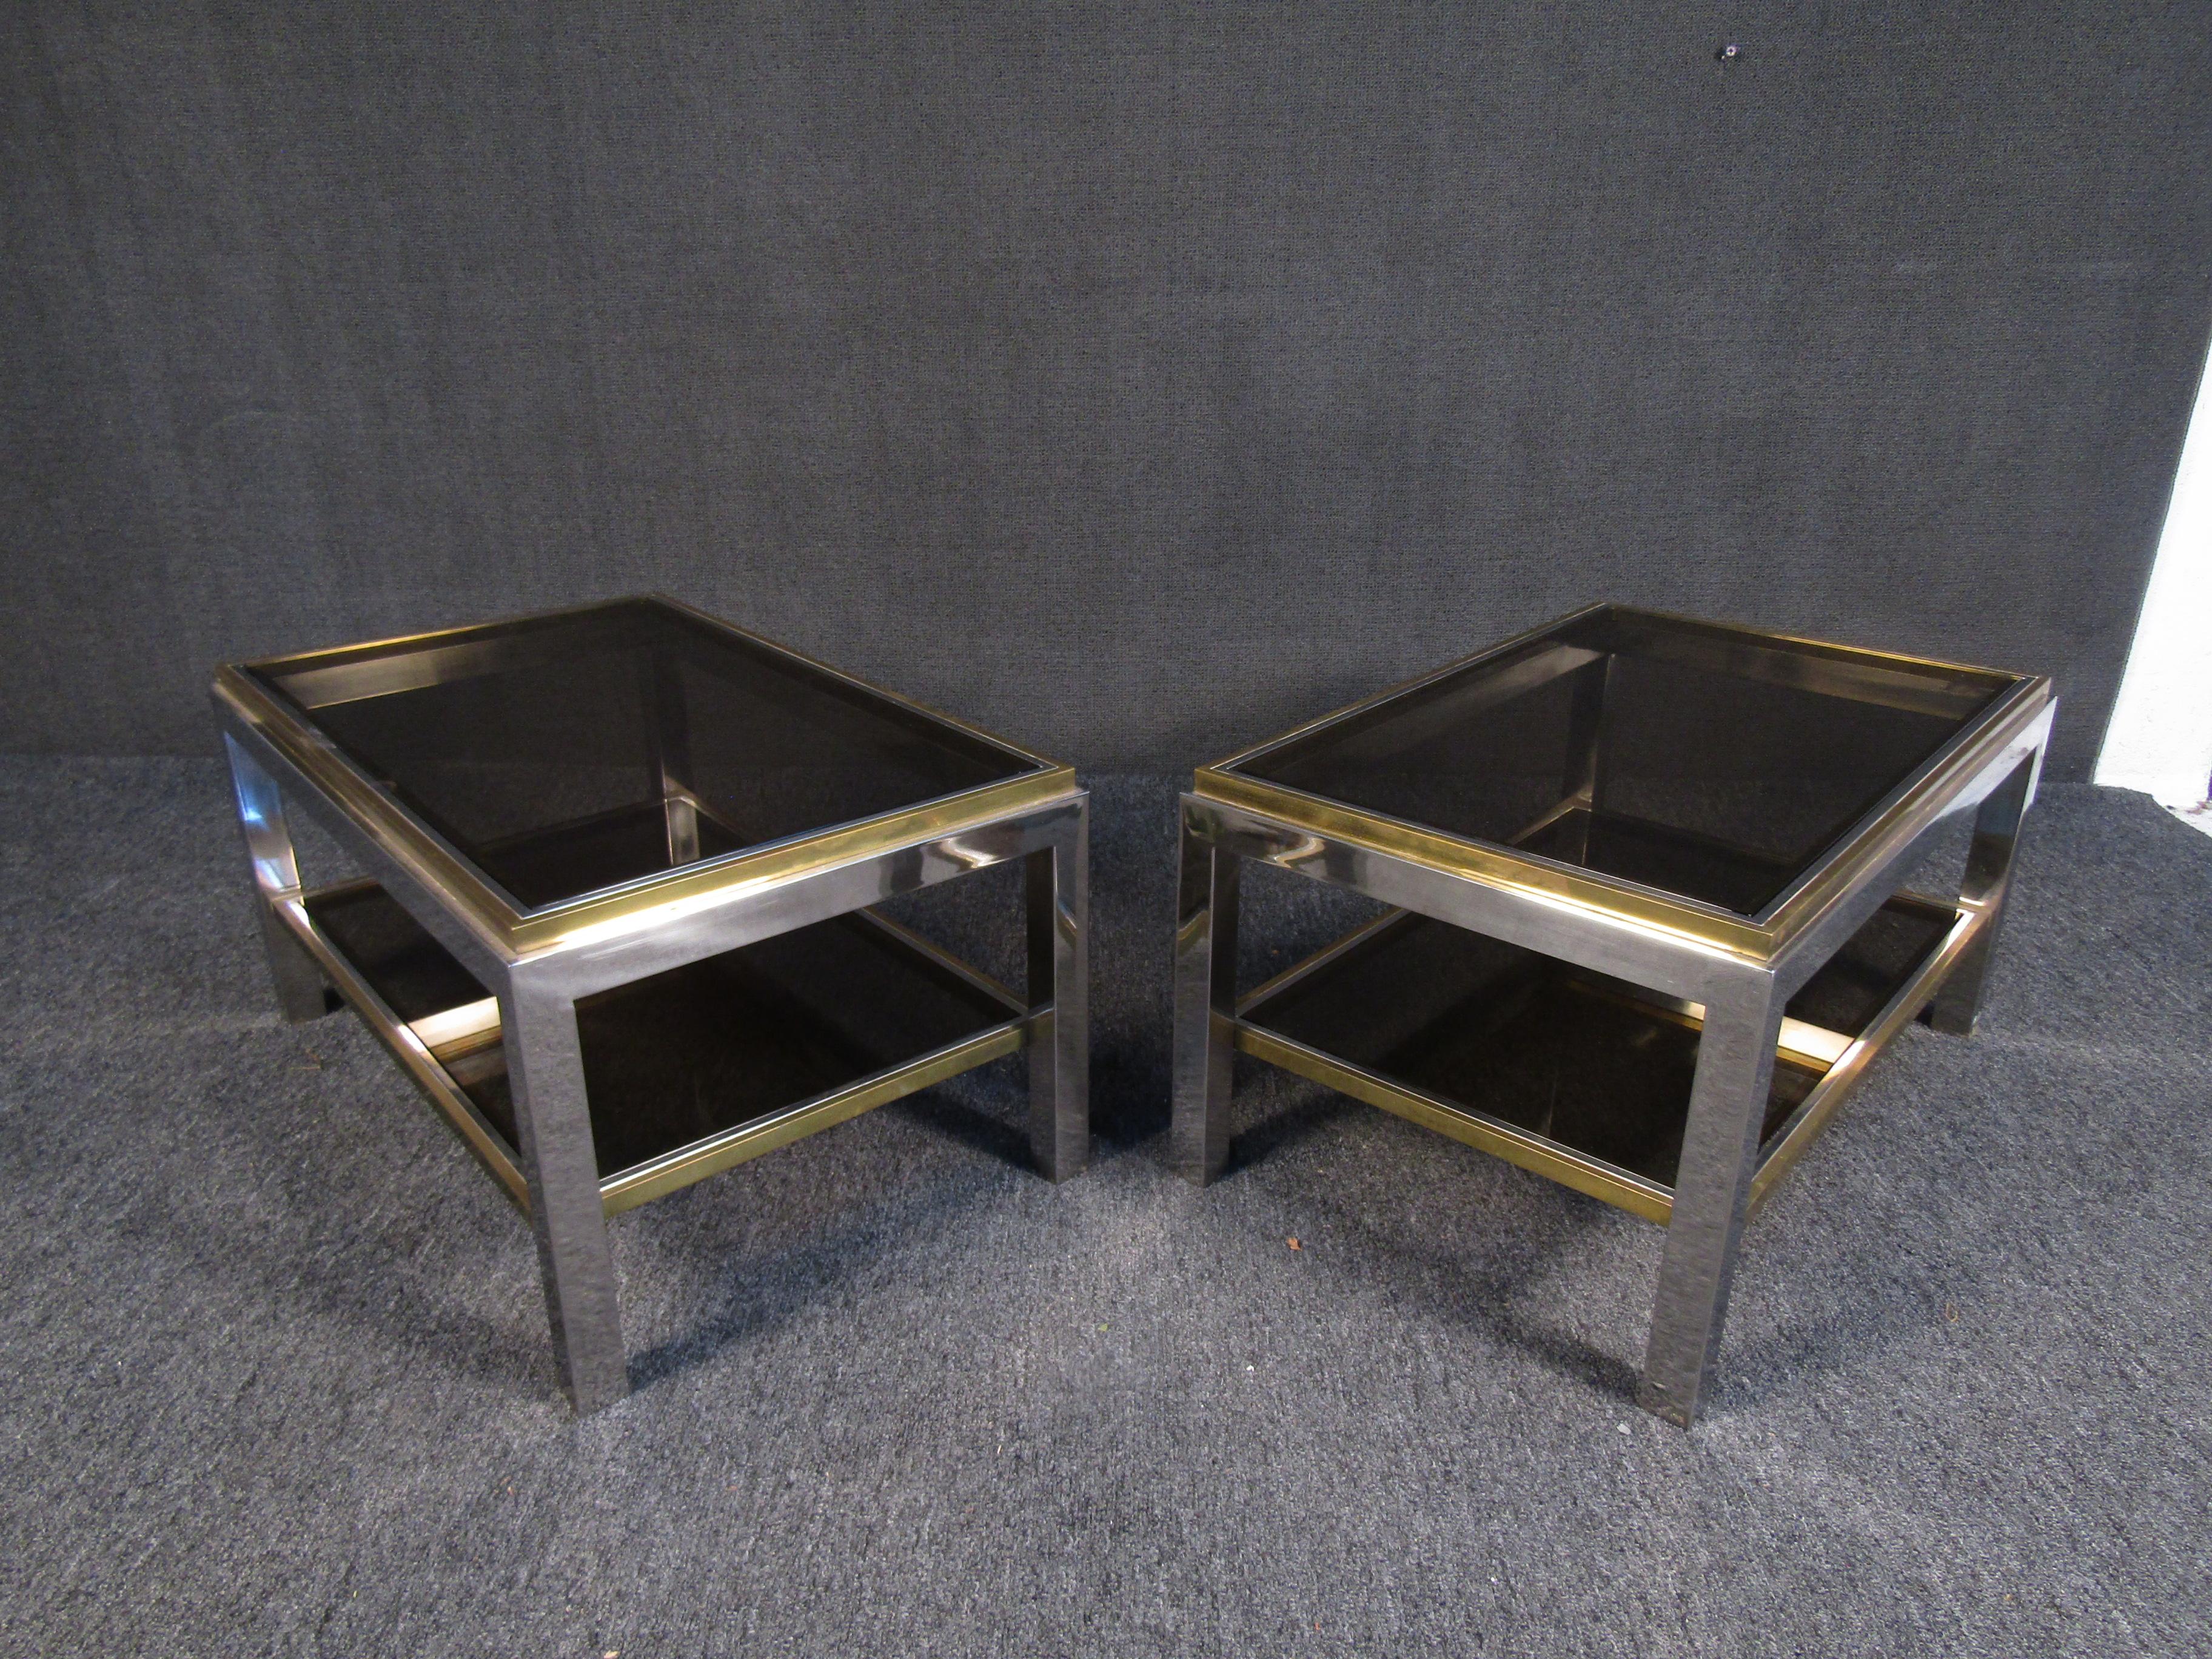 20th Century Pair of Elegant Side Tables by Willy Rizzo